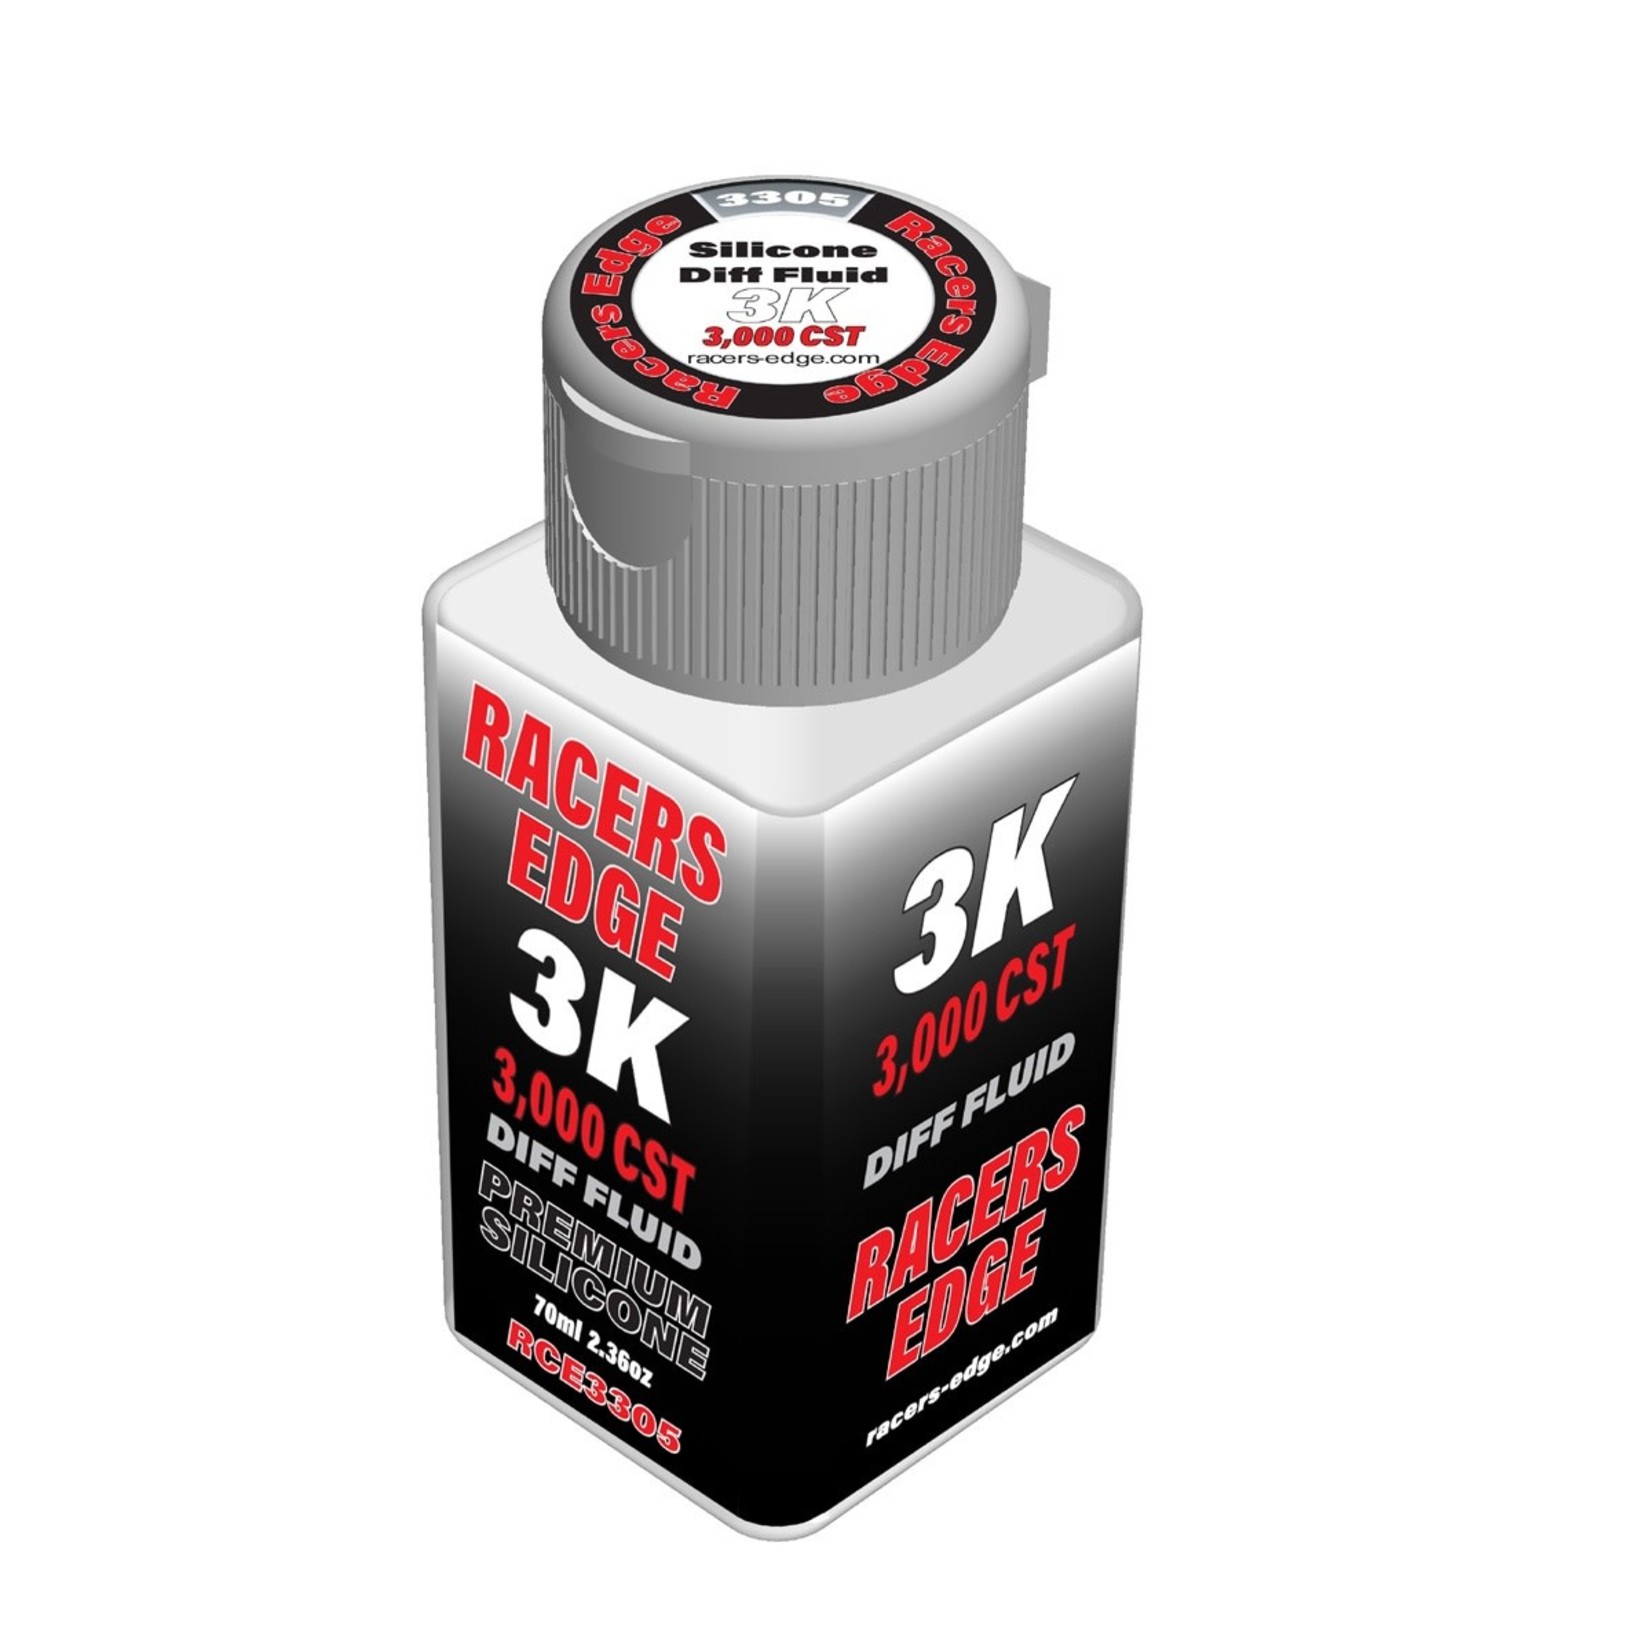 Racers Edge RCE3305 Racers Edge Pure Silicone Diff Fluid 3,000cst 70ml 2.36oz